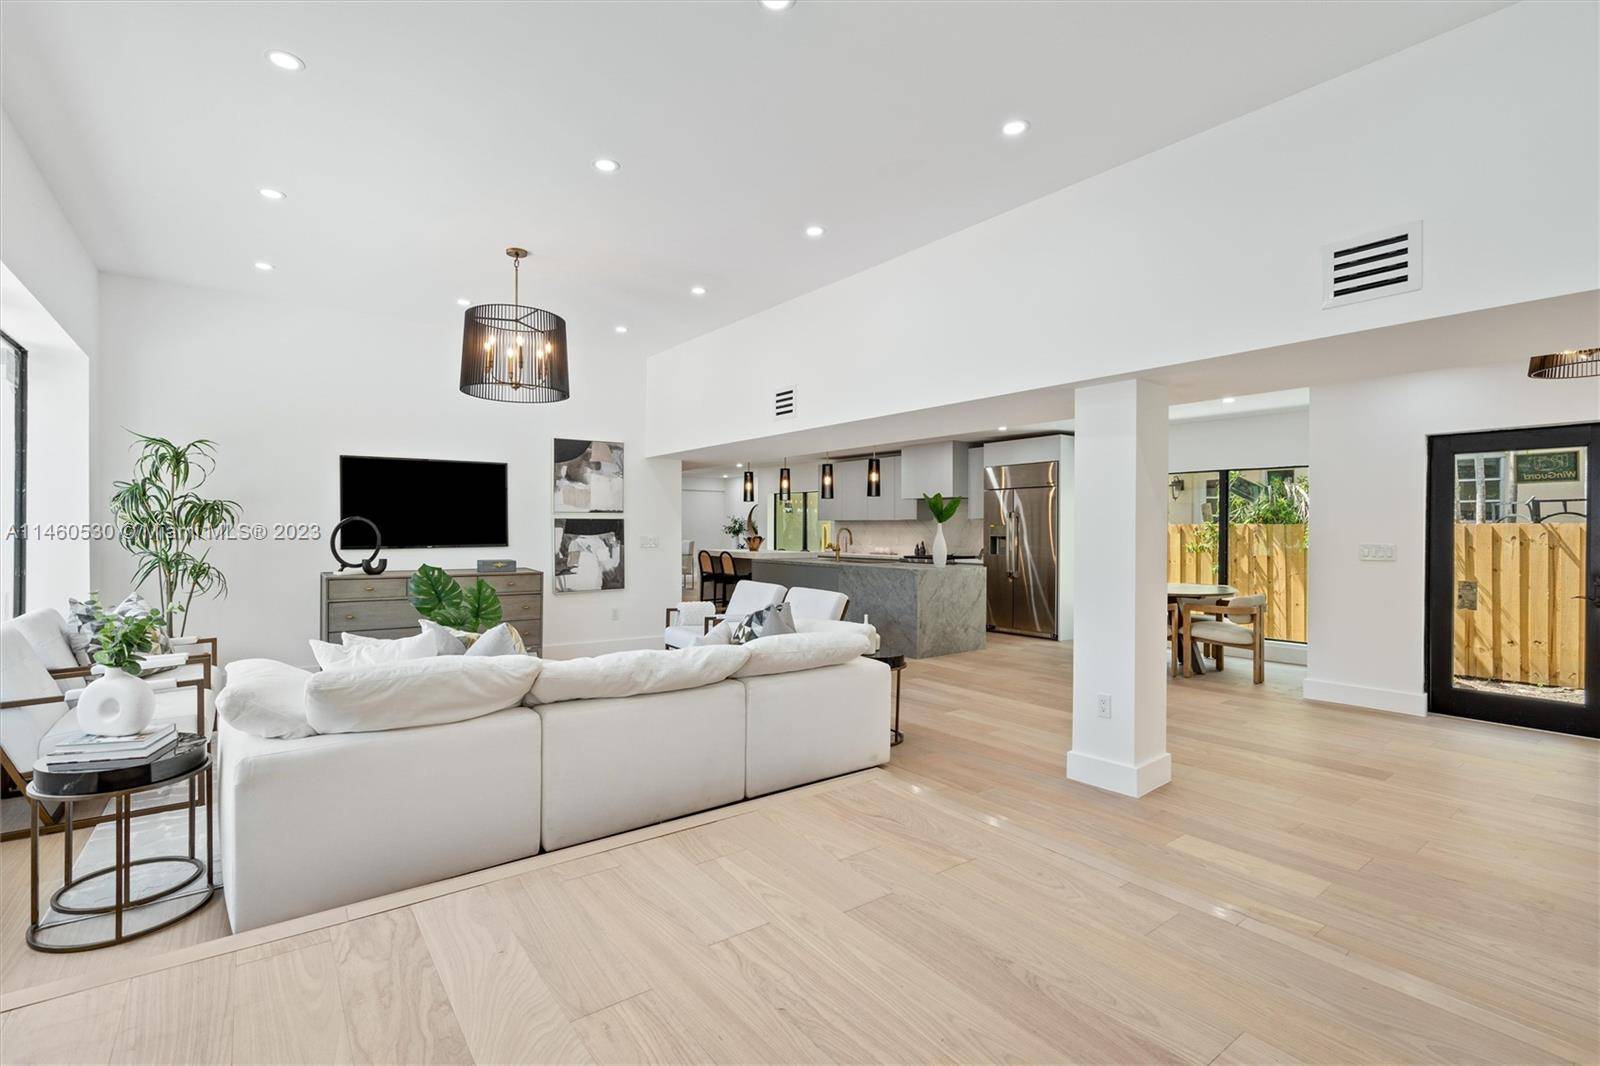 This stunningly renovated home will immediately demand your attention as you step through the door, with its large open living spaces and high end finishes.